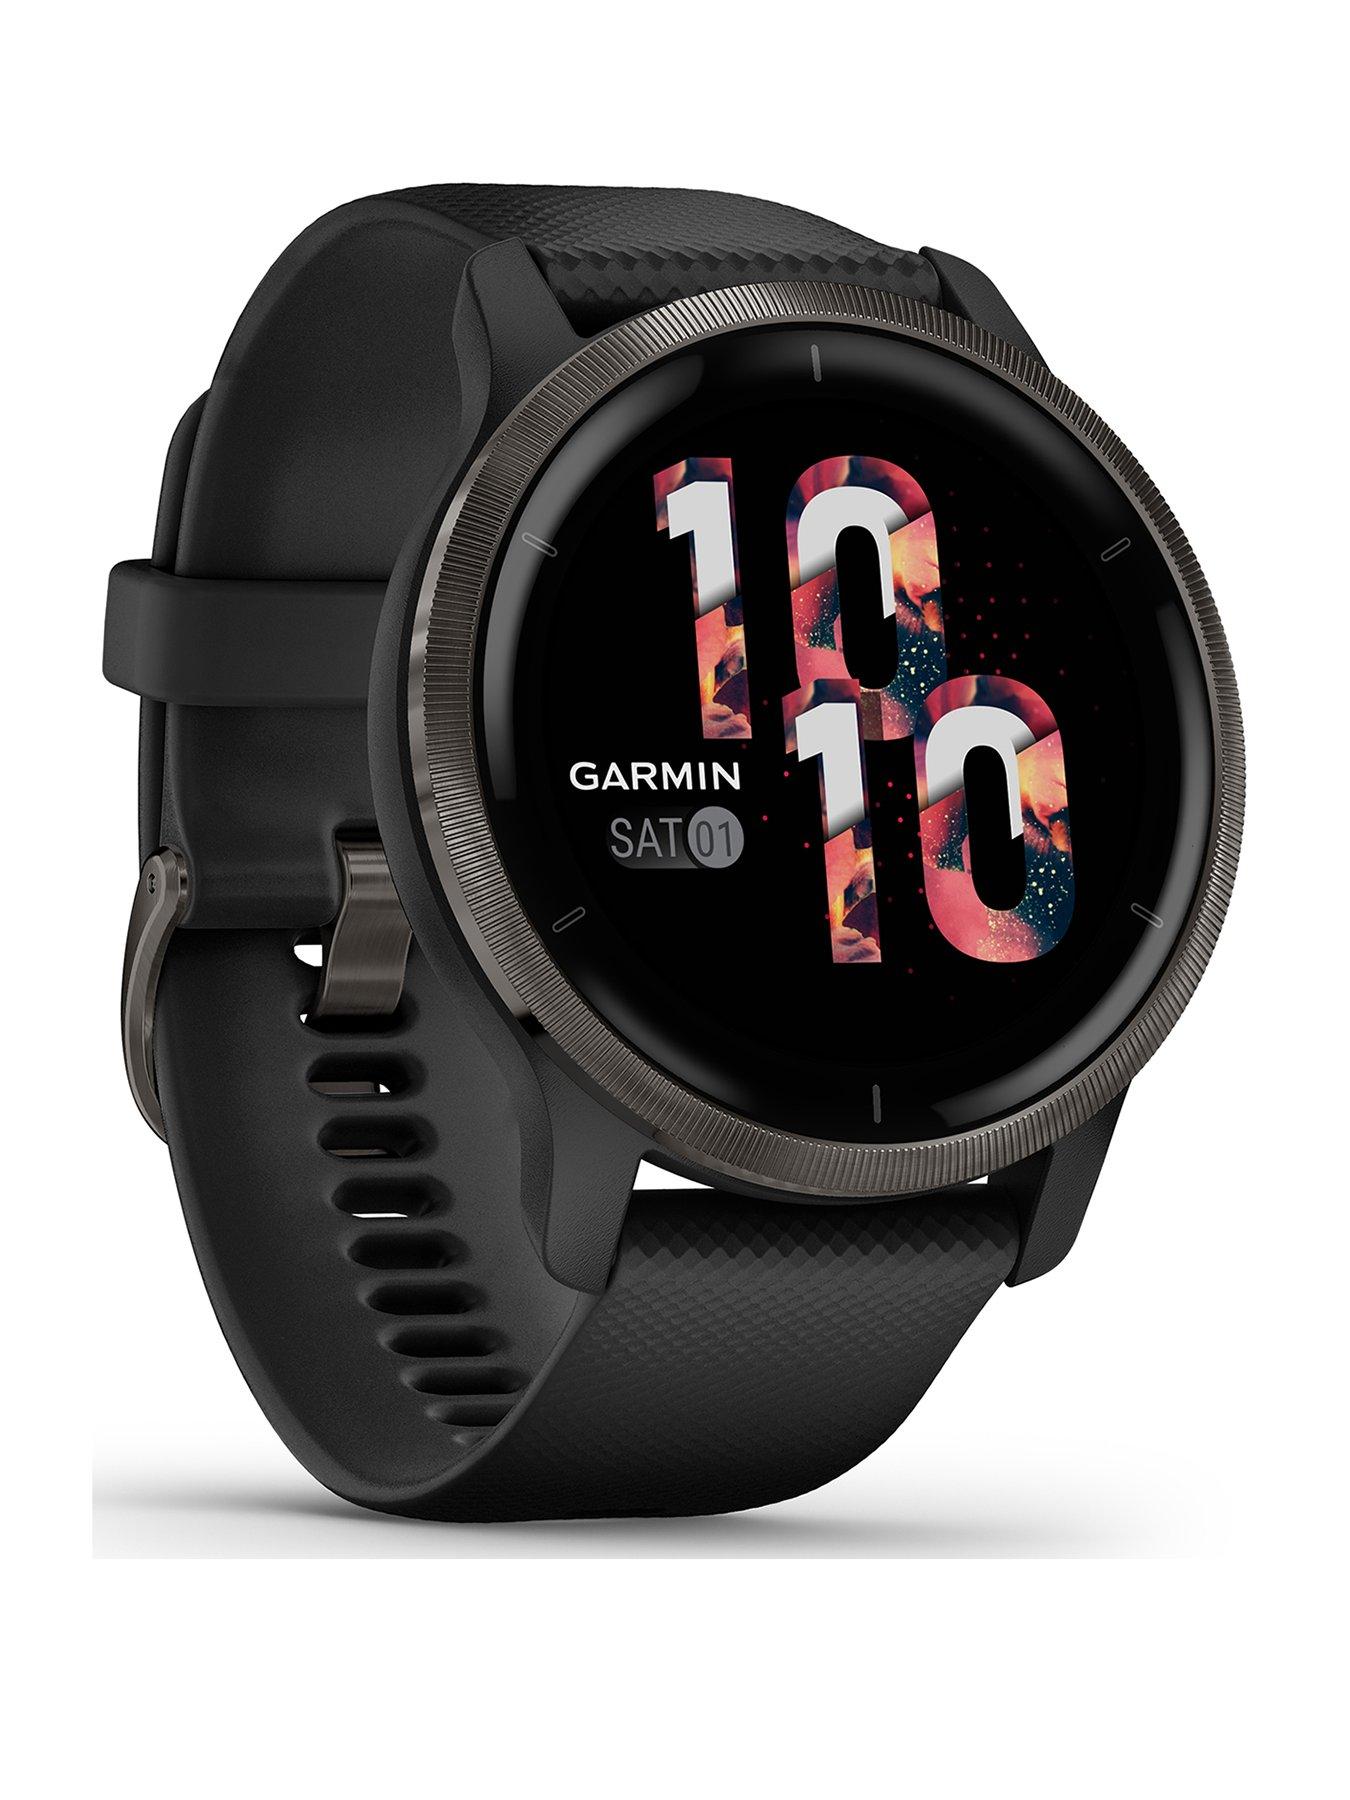  Garmin vivoactive 4S, Smaller-Sized GPS Smartwatch, Features  Music, Body Energy Monitoring, Animated Workouts, Pulse Ox Sensors, Rose  Gold with White Band : Clothing, Shoes & Jewelry